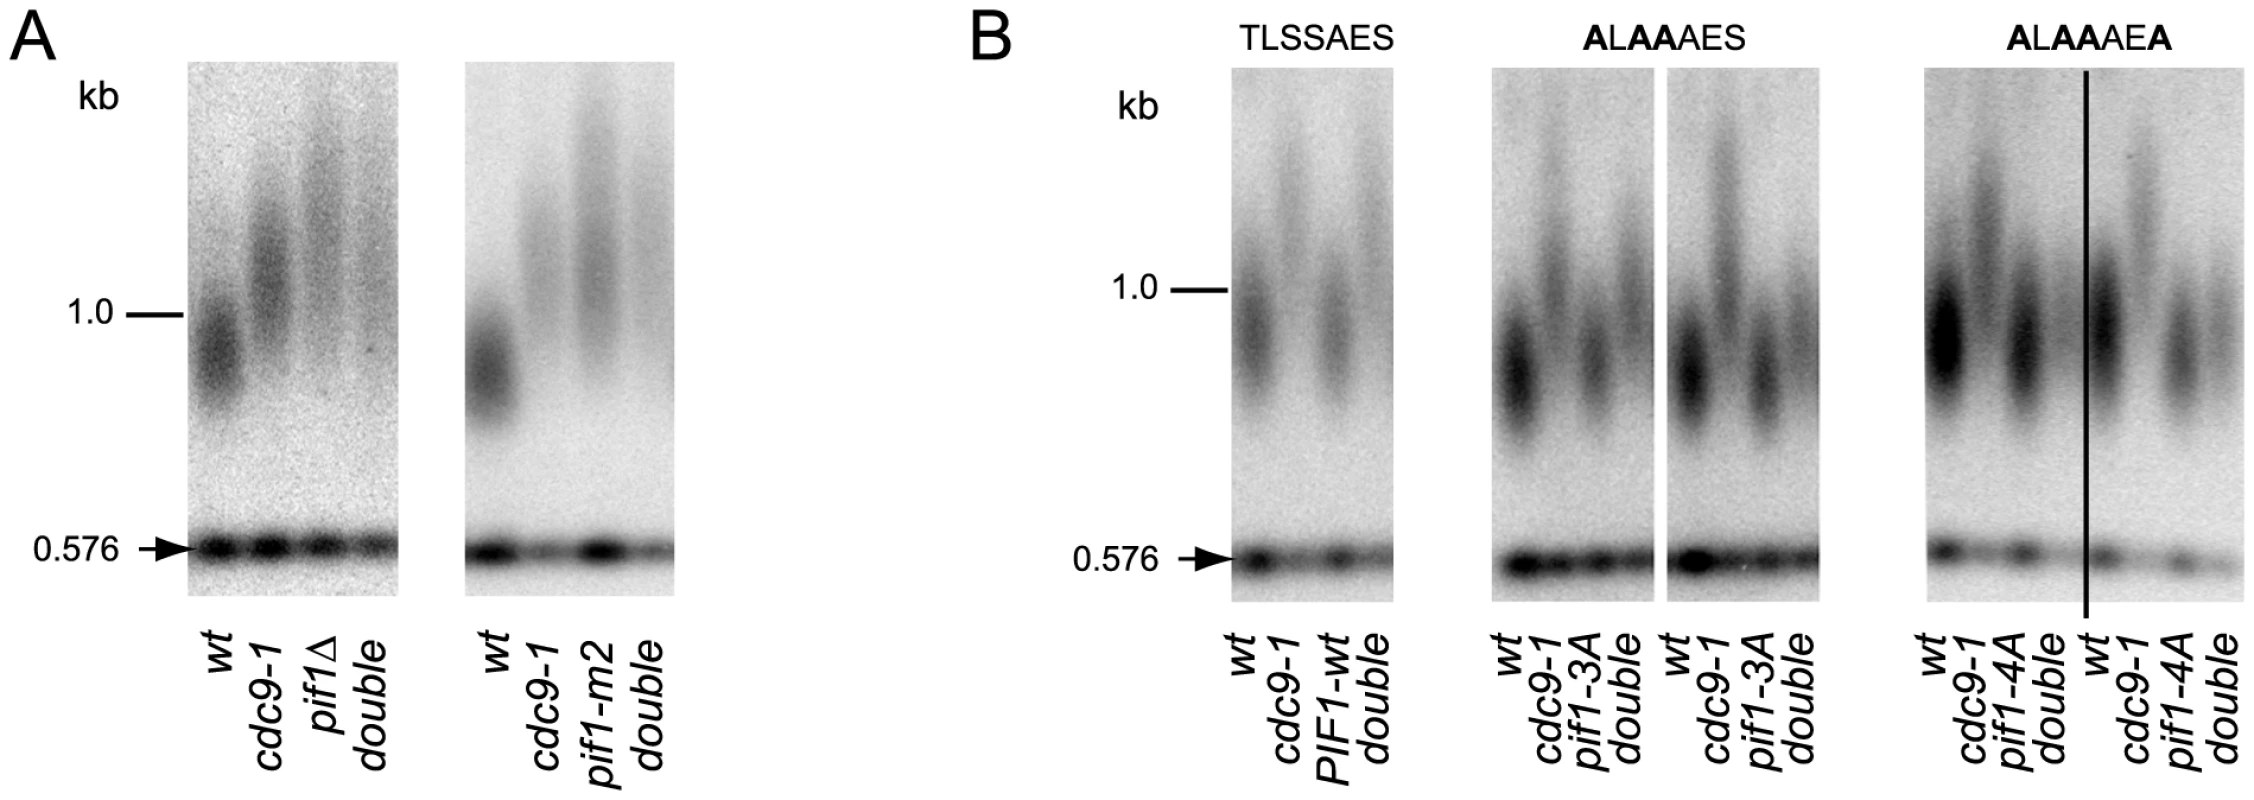 Telomere elongation in <i>cdc9-1</i> is dependent on the presence of nPif1 and its phosphorylation locus.